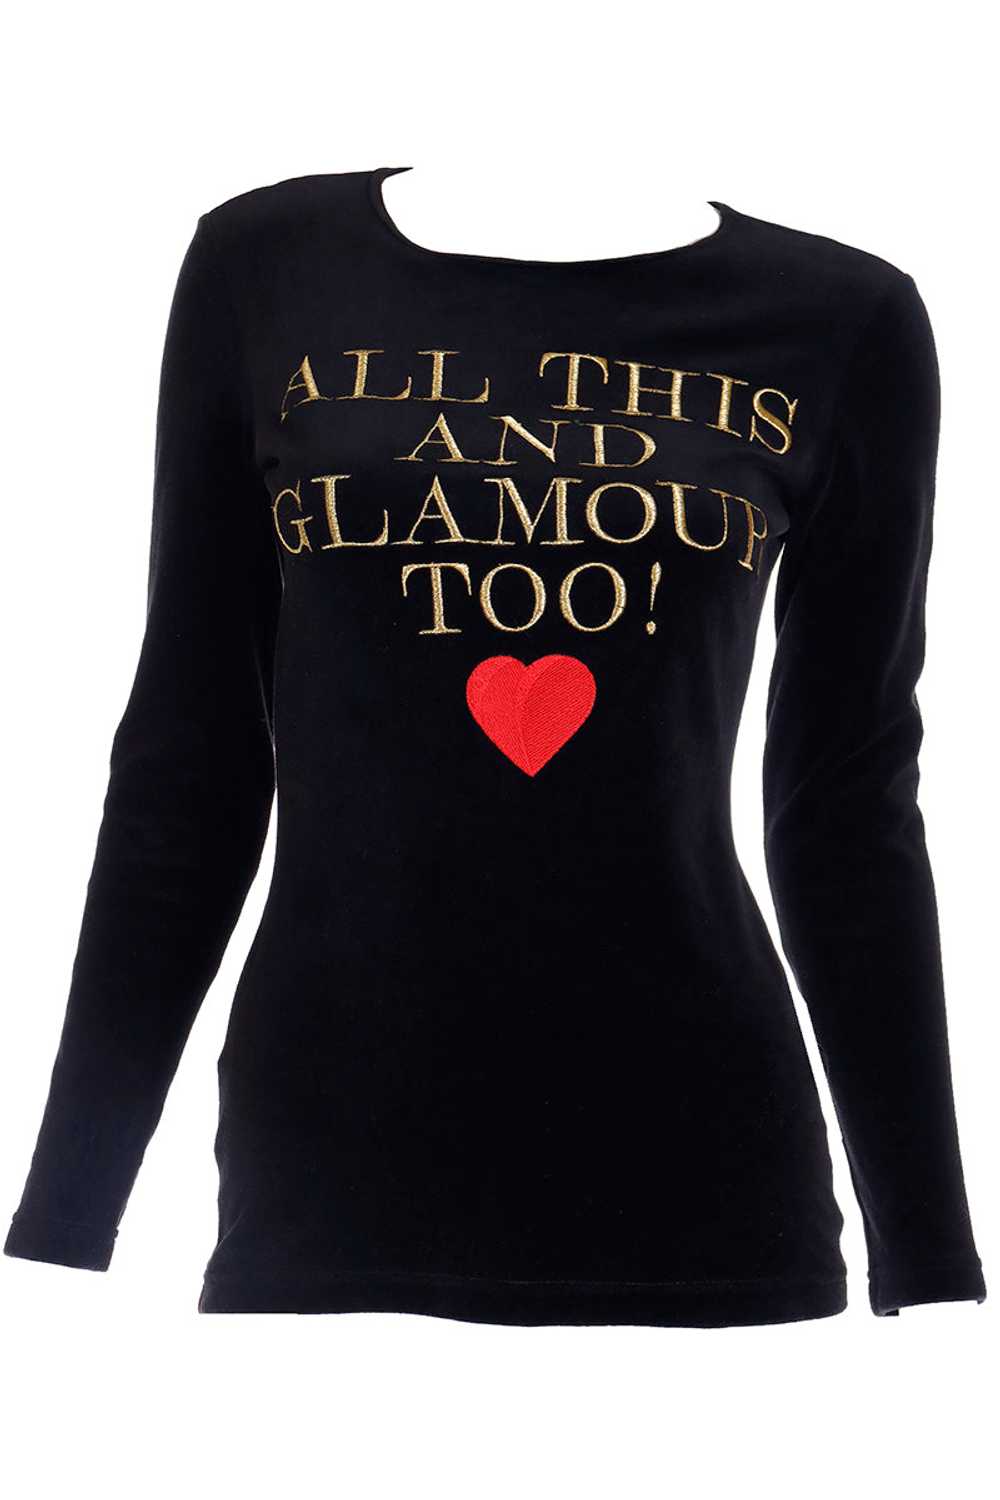 Moschino Vintage All This and Glamour Too Black G… - image 1